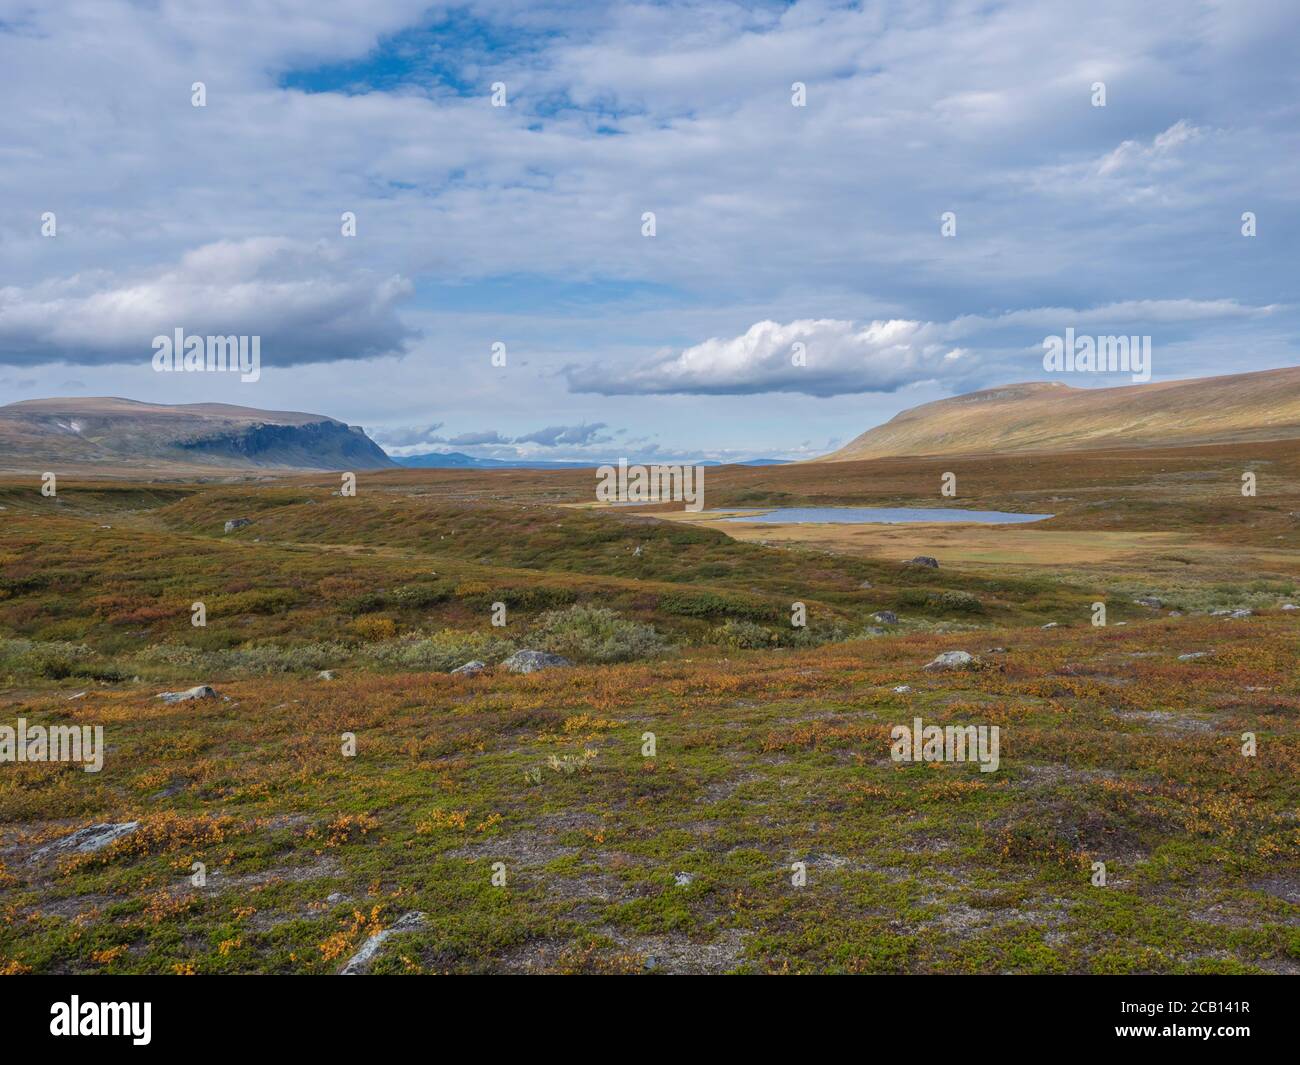 Lapland landscape with blue lake, snow capped mountain at Kungsleden hiking trail near Saltoluokta, Sweden. Wild nature with autumn colored bushes Stock Photo